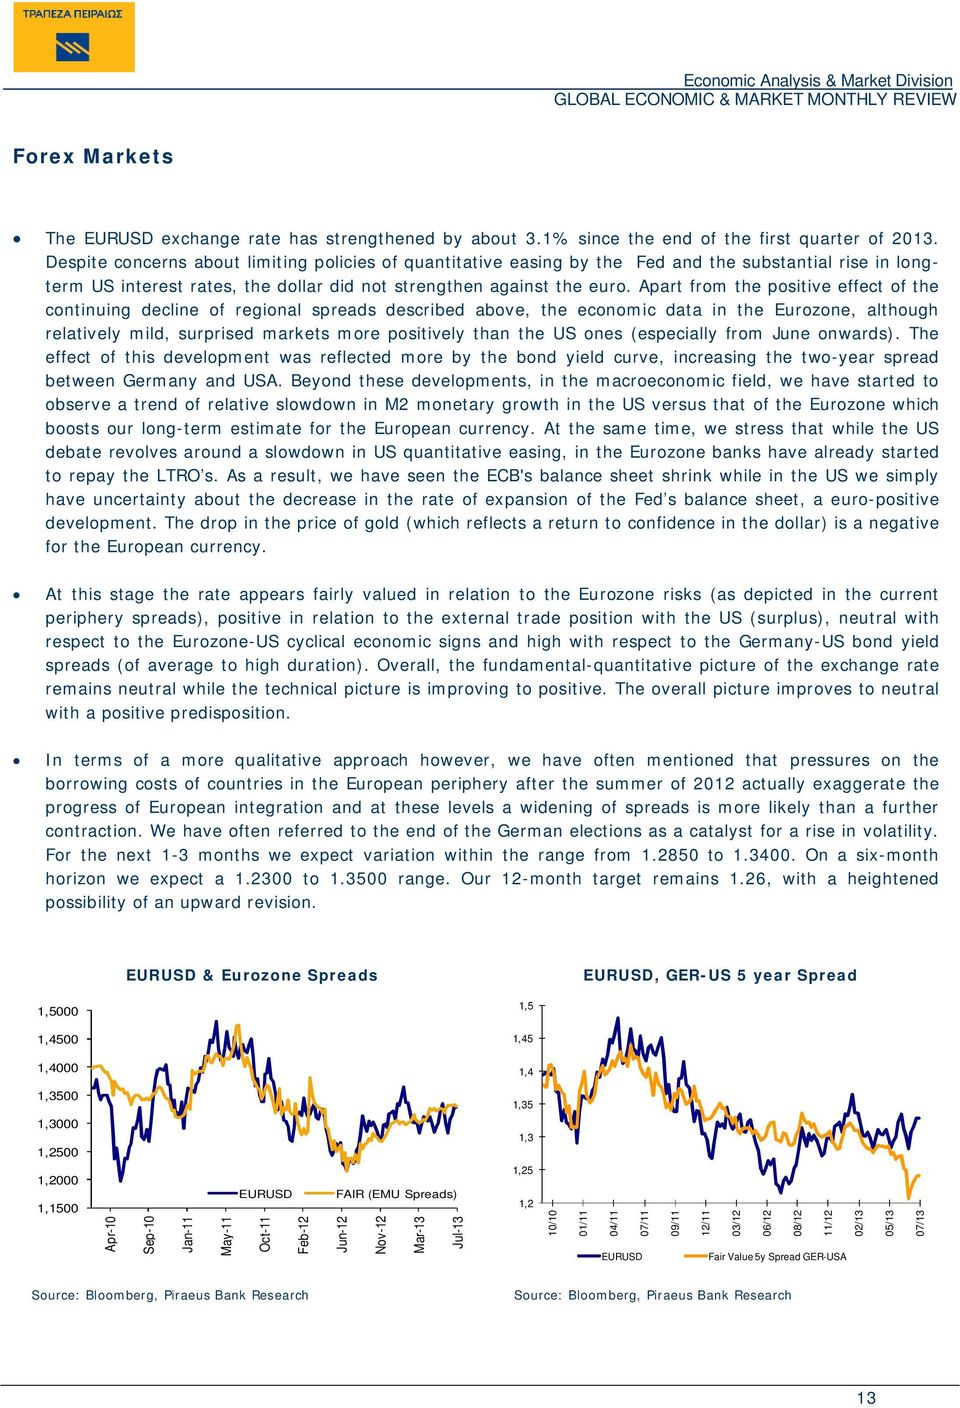 Apart from the positive effect of the continuing decline of regional spreads described above, the economic data in the Eurozone, although relatively mild, surprised markets more positively than the